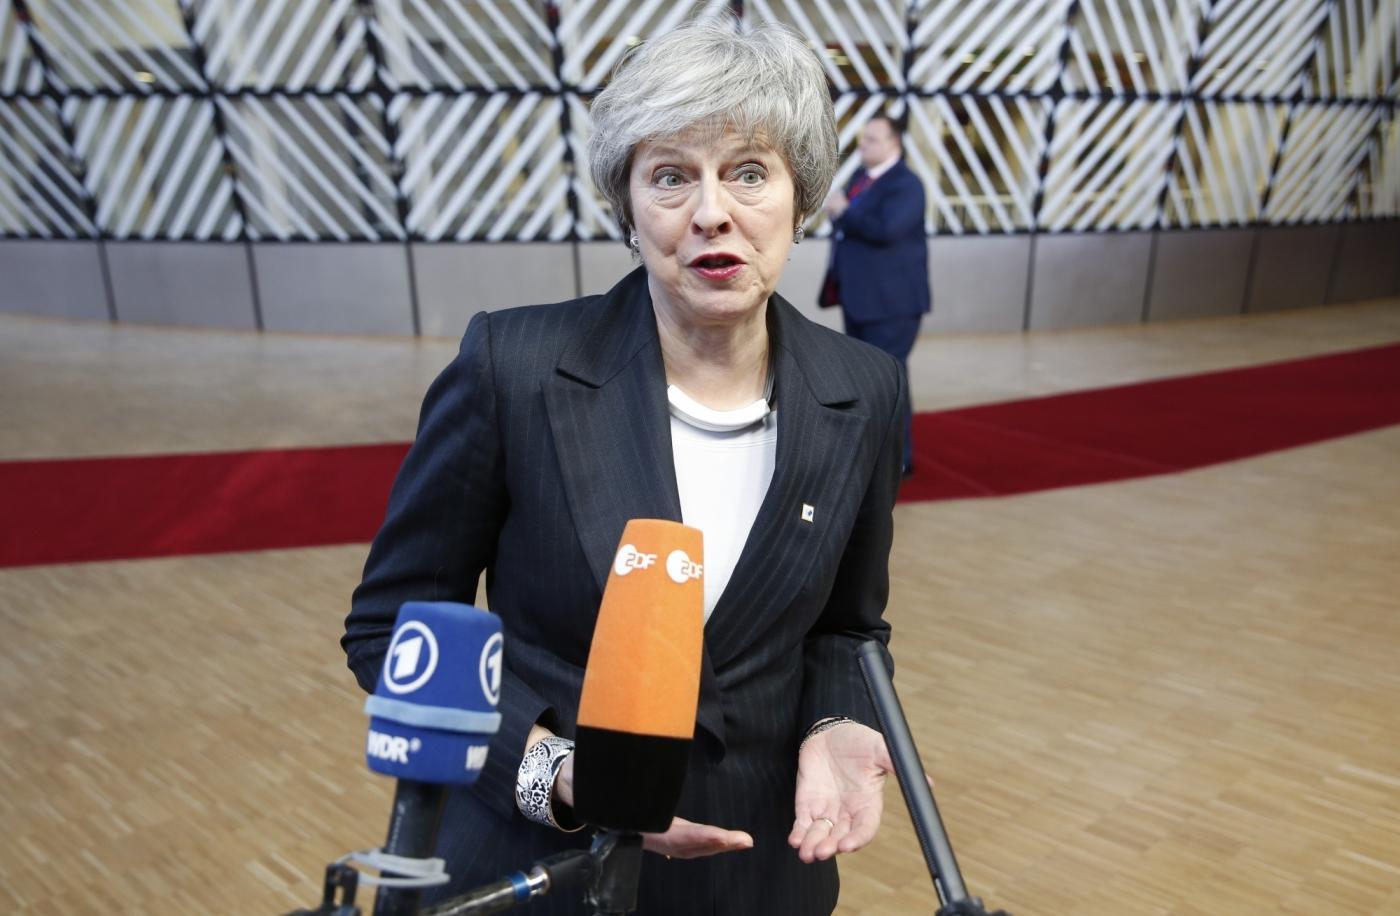 BRUSSELS, Dec. 13, 2018 (Xinhua) -- British Prime Minister Theresa May speaks to media upon her arrival at a two-day EU Summit in Brussels, Belgium, Dec. 13, 2018. (Xinhua/Ye Pingfan/IANS) by .